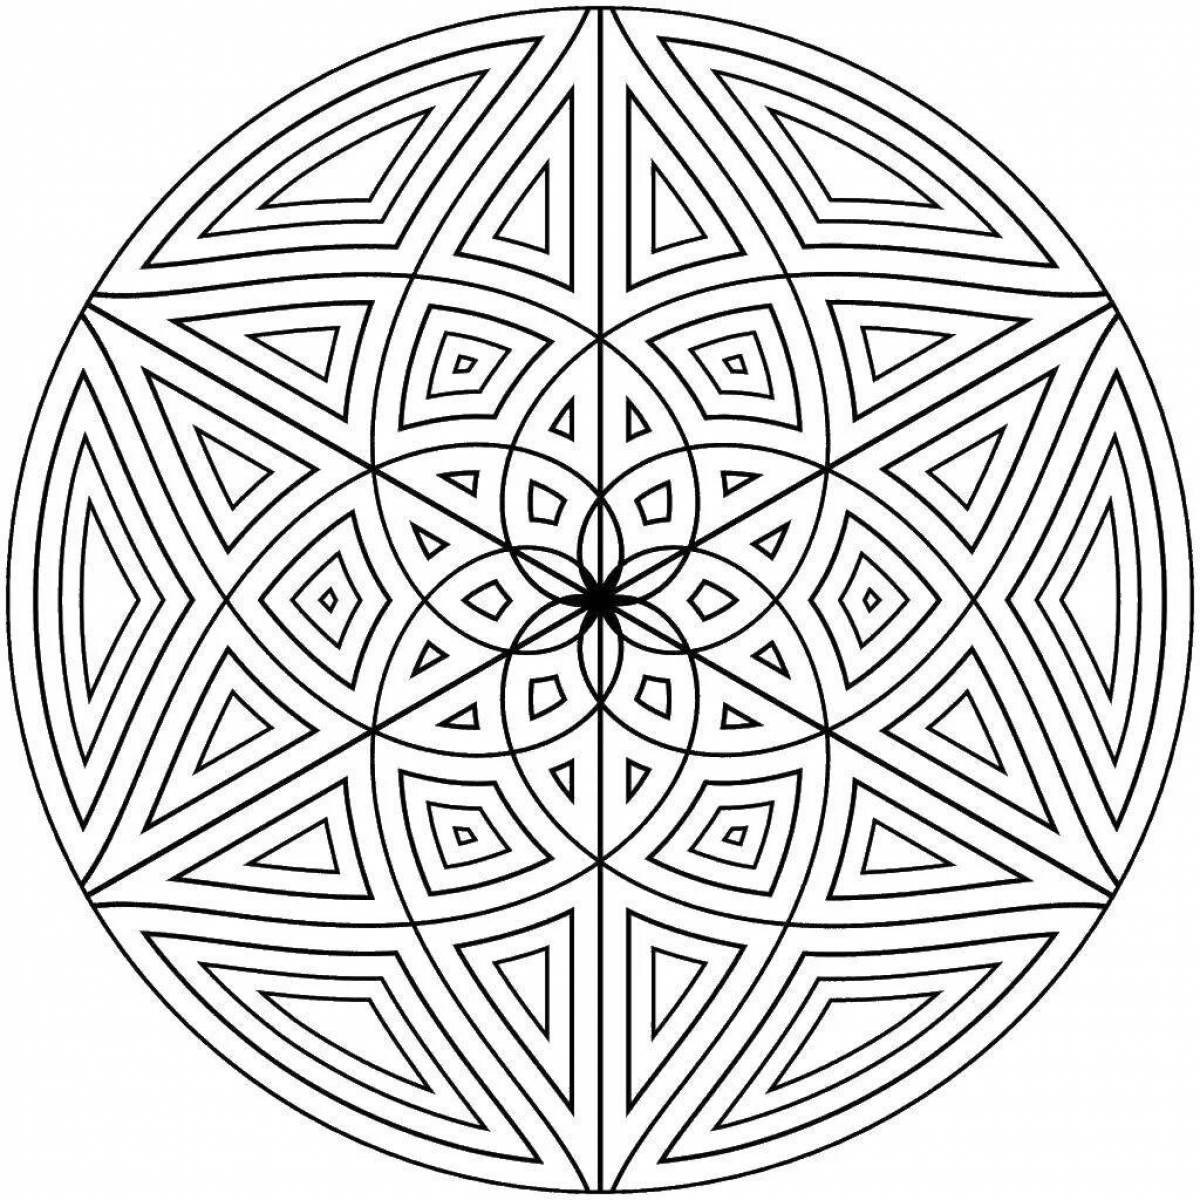 A coloring page with an attractive circular pattern